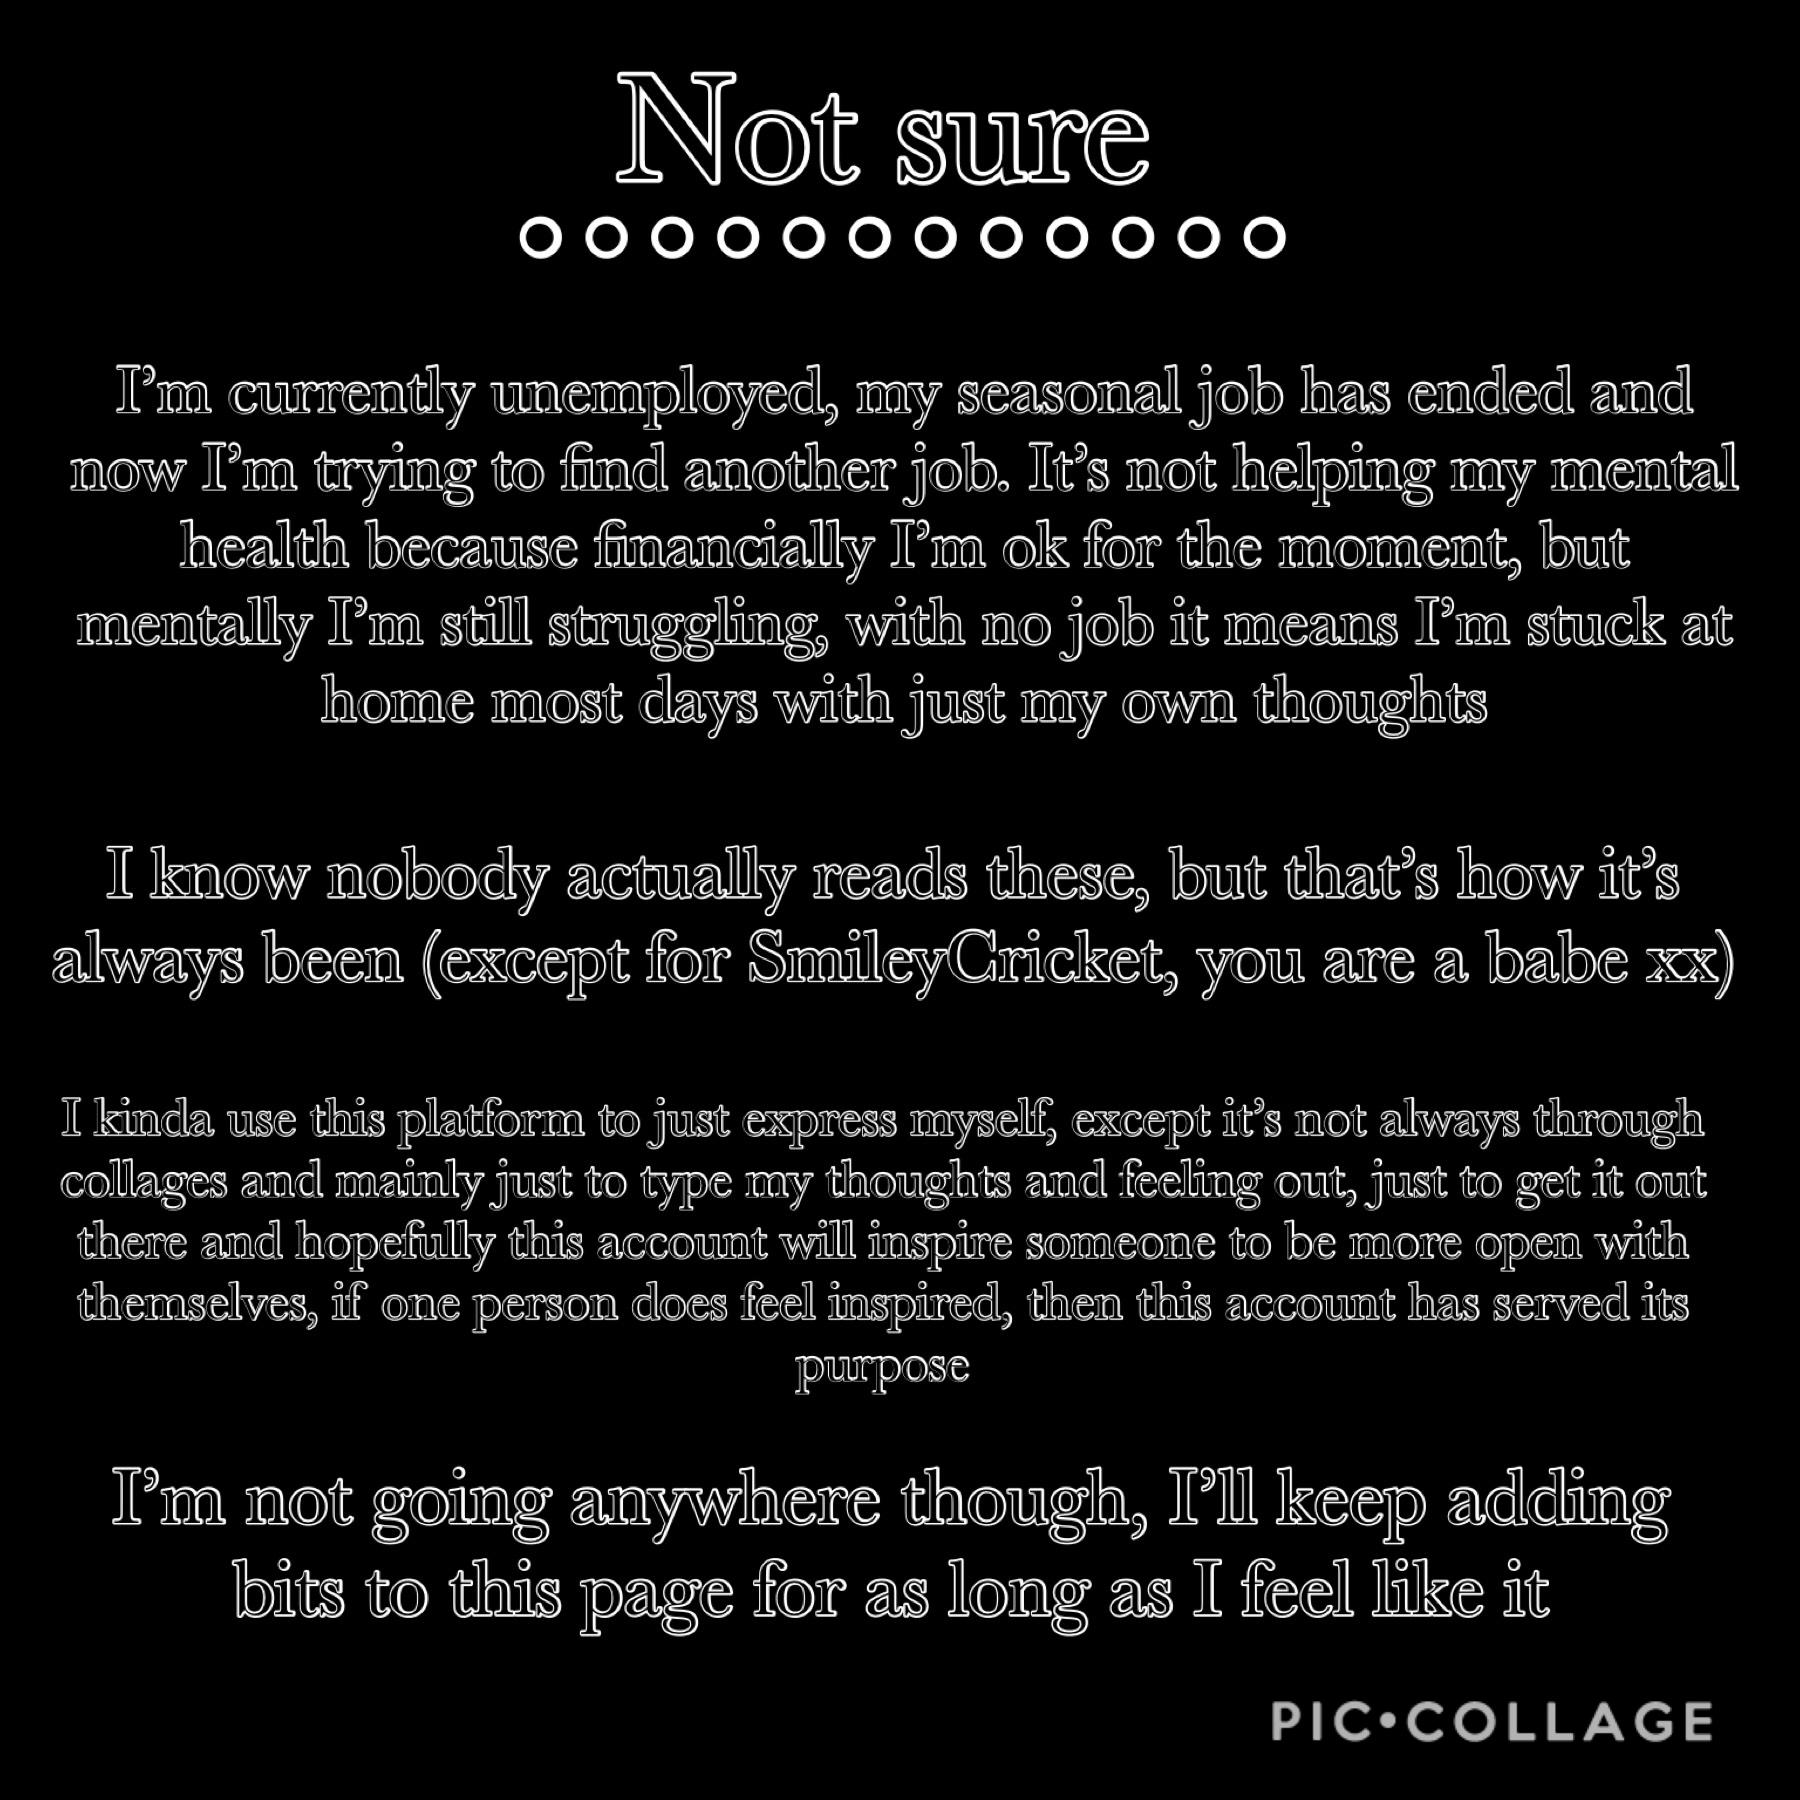 23/11/18 Short life update and an update for this account, if anybody new comes to the page and doesn’t get what this page is about